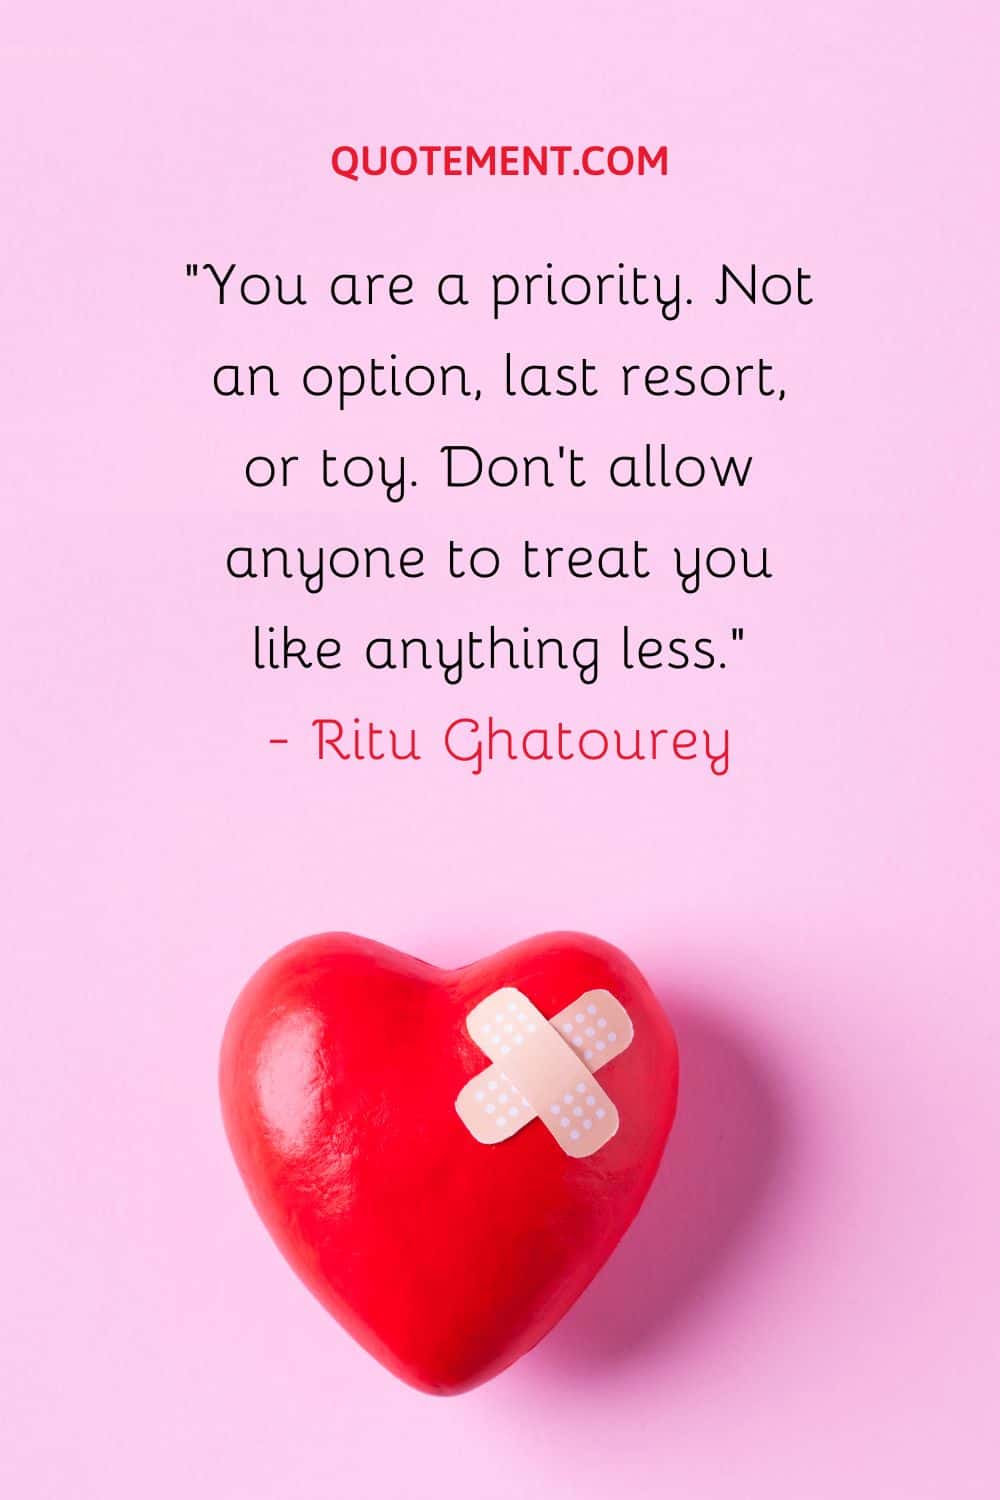 You are a priority. Not an option